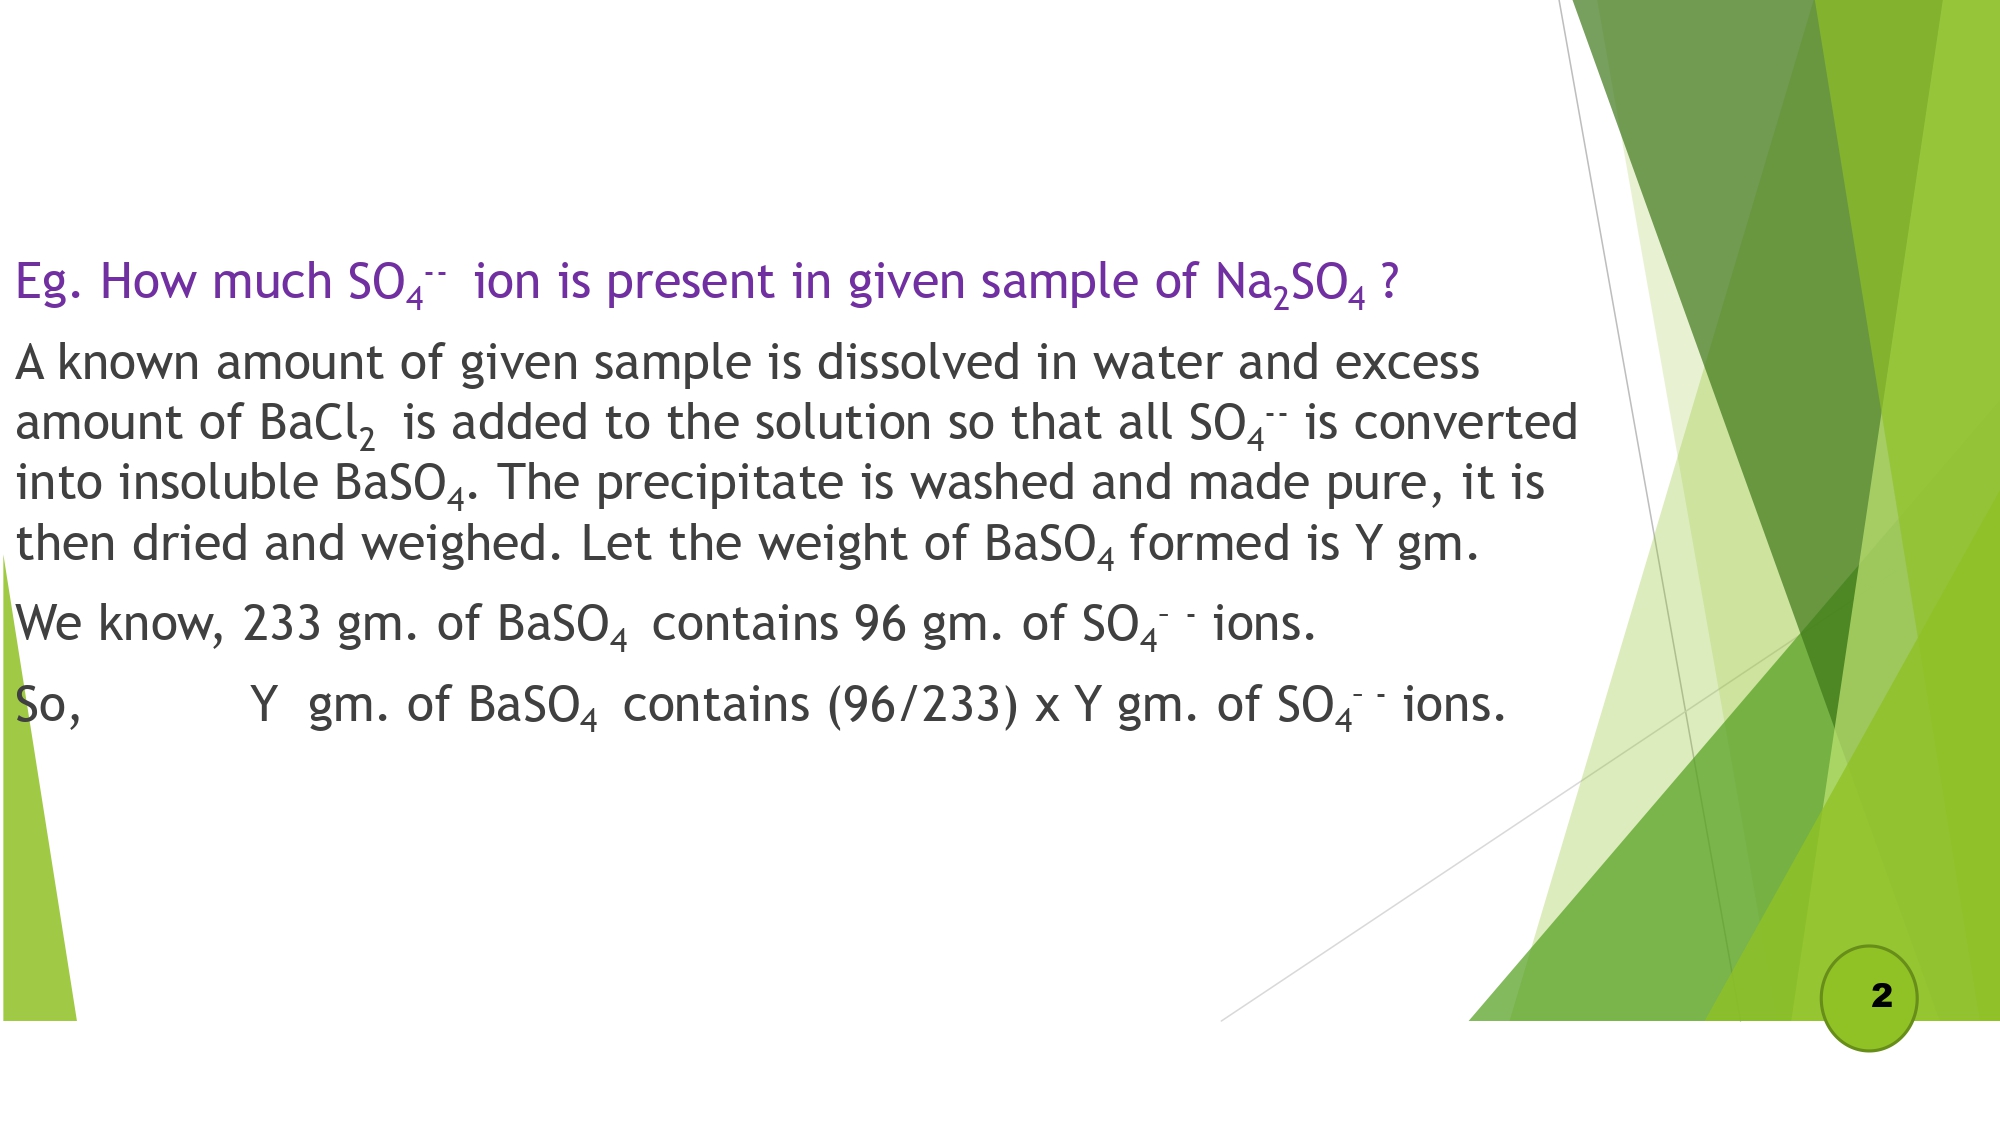 Eg. How much SO4 -- ion is present in given sample of Na2SO4 ?